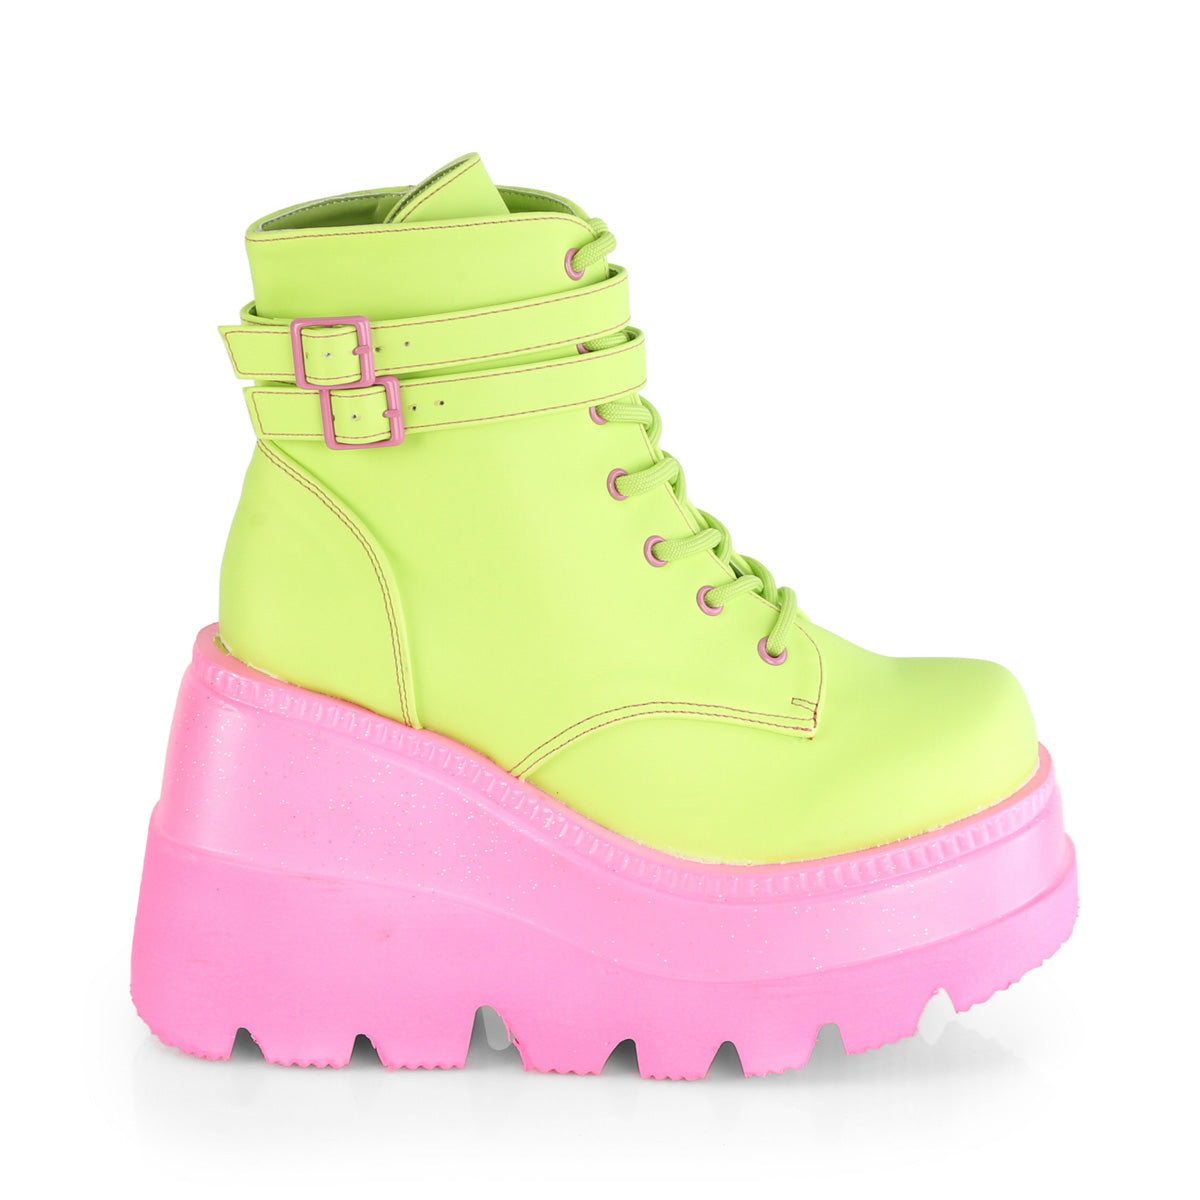 DemoniaCult Womens Boots SHAKER-52 Lime Reflective Vegan Leather/Pink